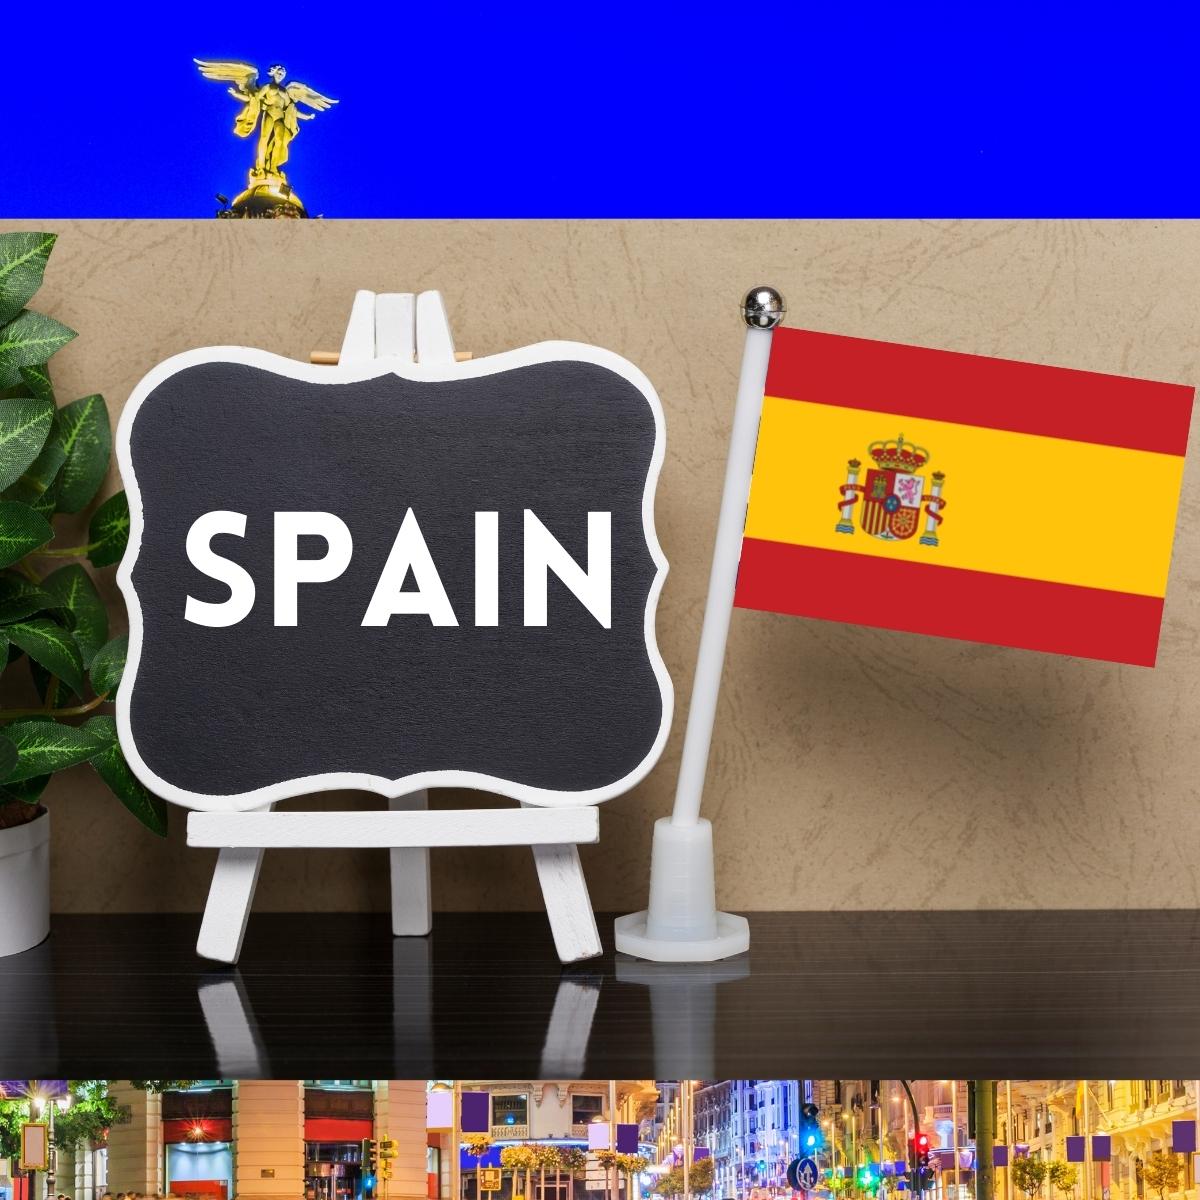 Spain at Euro Fine Foods